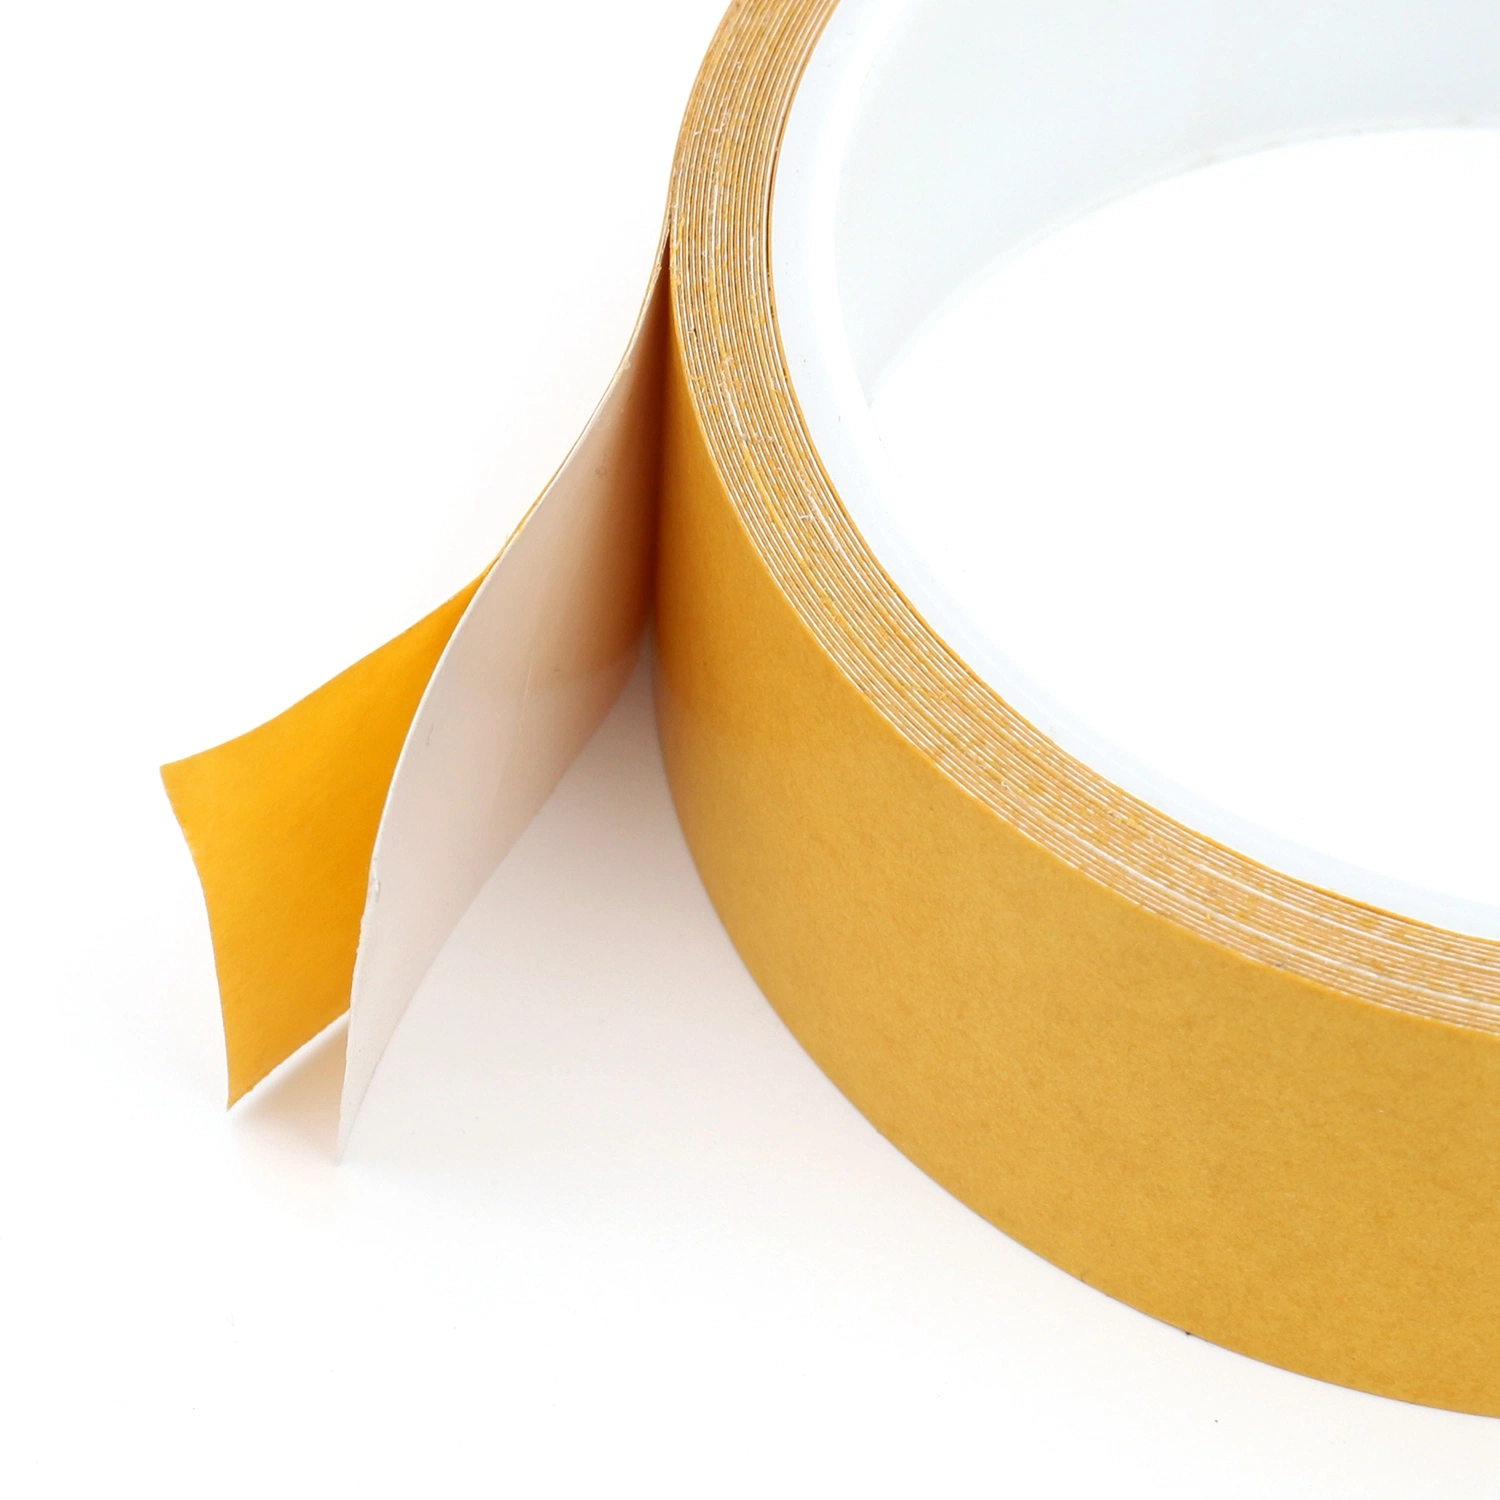 325mic Double Sided PVC Protection Tape for Carpet (BY6968)